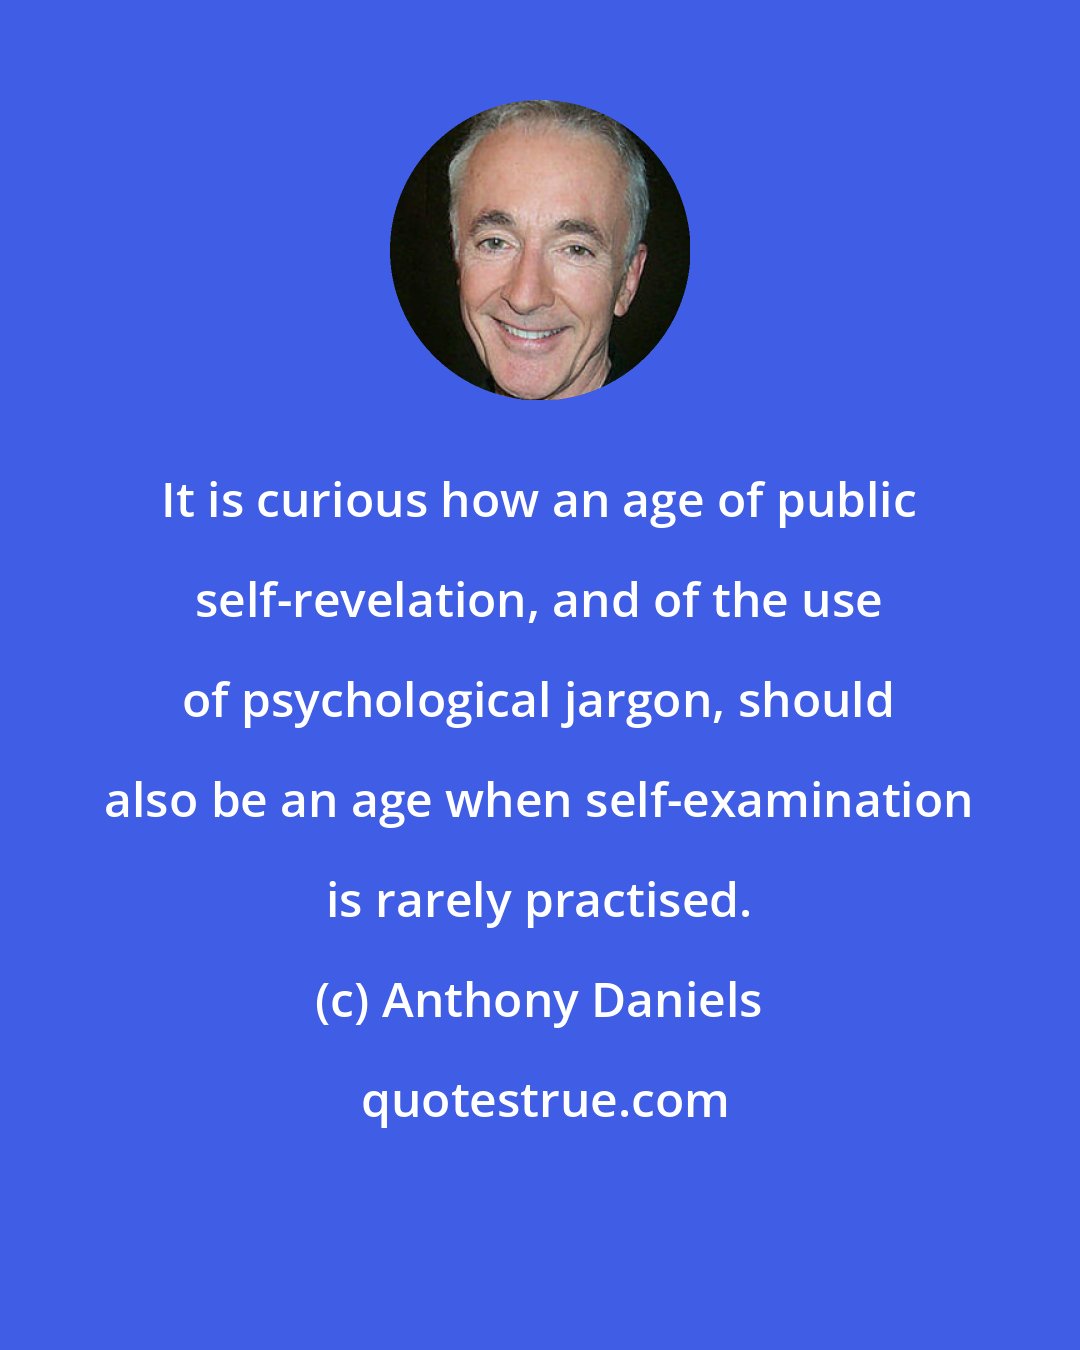 Anthony Daniels: It is curious how an age of public self-revelation, and of the use of psychological jargon, should also be an age when self-examination is rarely practised.